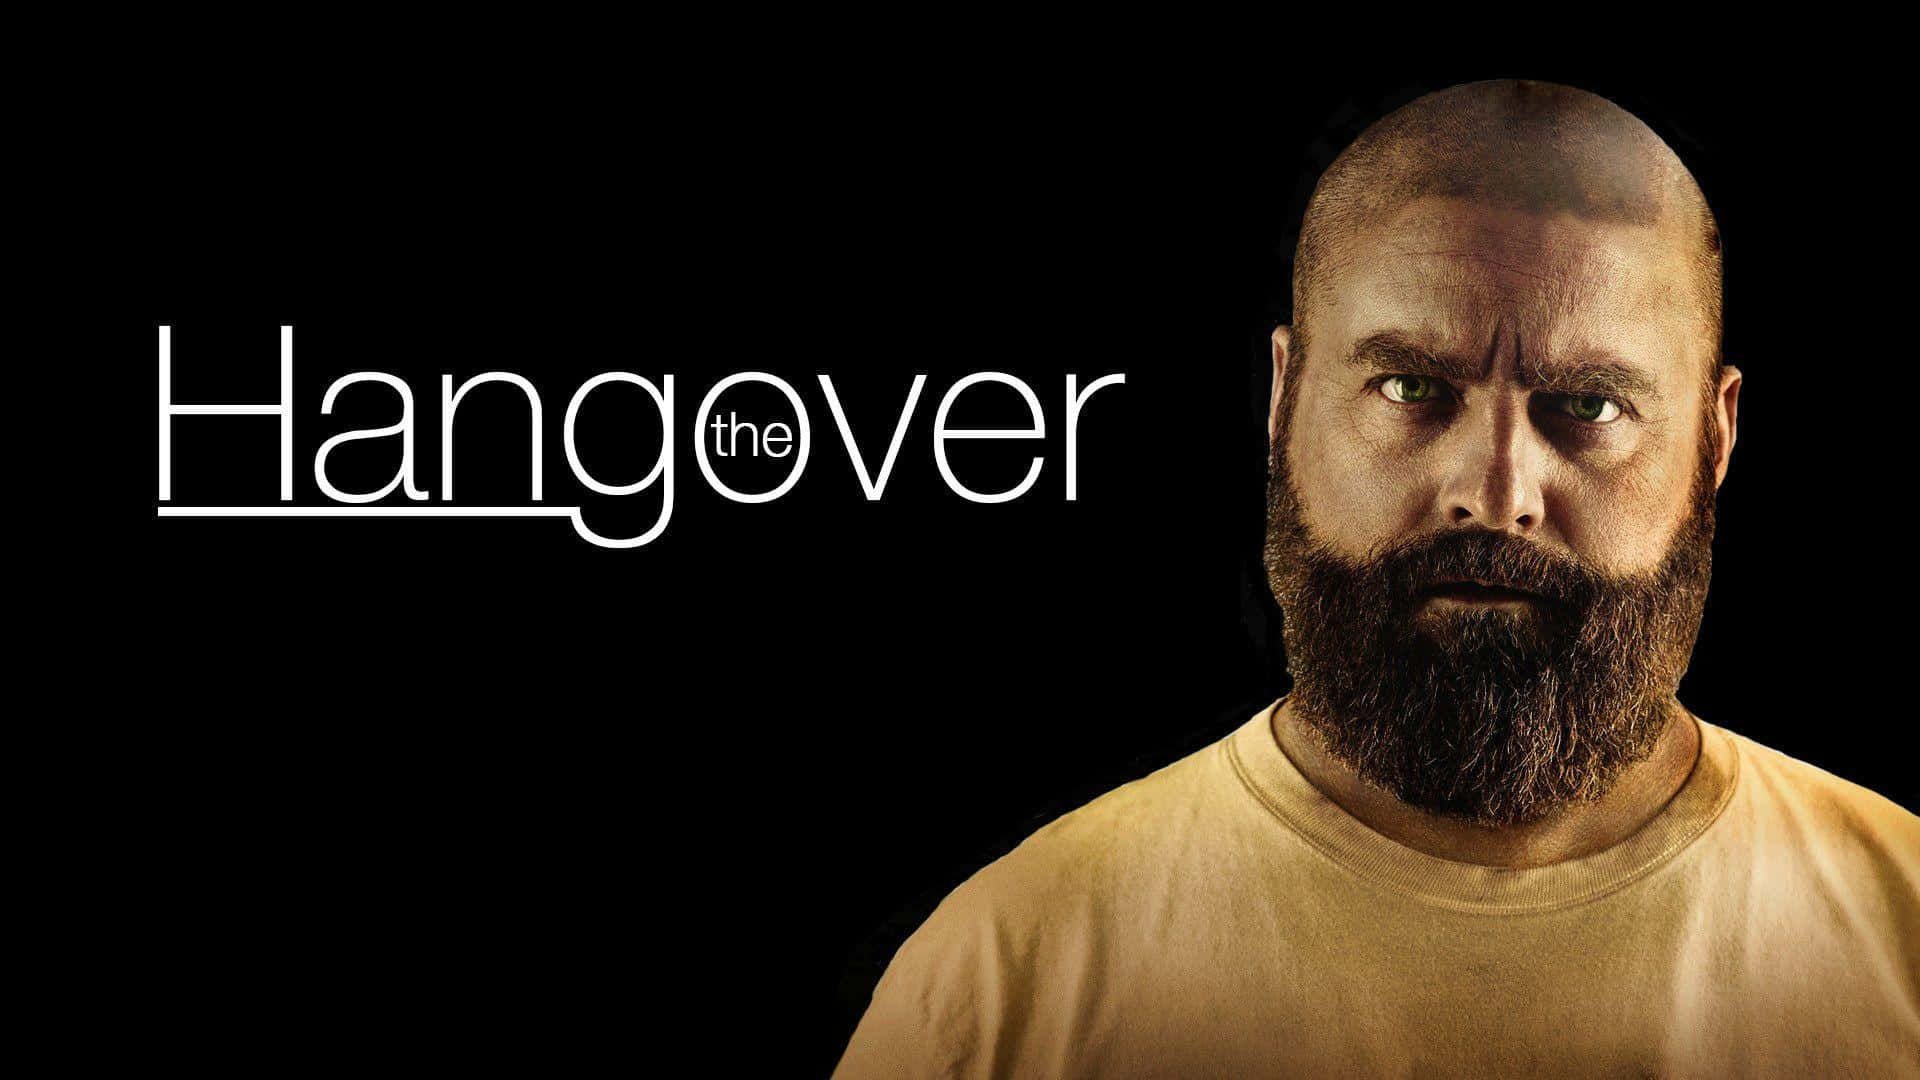 A Man Suffering From A Severe Hangover After A Night Of Partying. Wallpaper